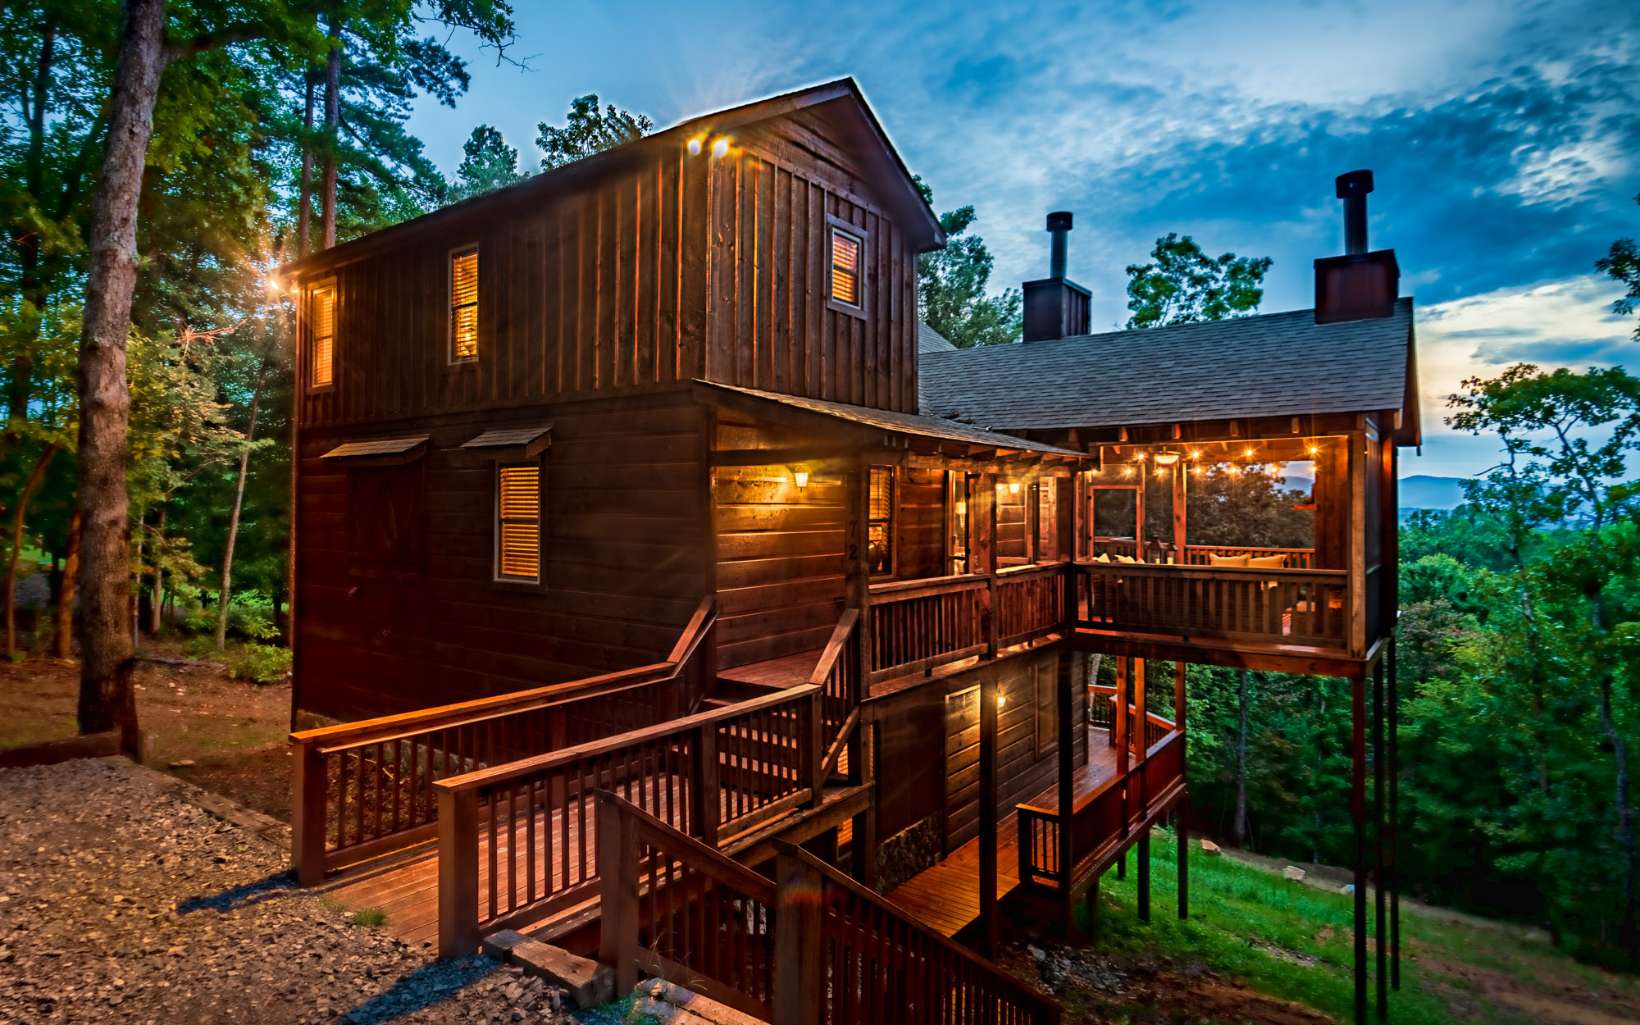 Unobstructed layered mountain views for miles!! Surrounded by National Forest, but just minutes from DT Blue Ridge, you get the best of both worlds! This rustic mountain getaway features a glass wall in the great room, bringing the outdoors inside. The unique Blue Pine interior paired with warm lighting creates a cozy & inviting atmosphere where you'll feel right at home. The main level offers a large kitchen with granite countertops and an open concept dining & living room complete w/ a wood burning fireplace. The living area extends to an expansive deck overlooking the breathtaking views. With a basement bunk room, game room w/ wet bar & hot tub on the terrace deck, this cabin is sure to comfortably host many guests! Located in the highly desired Hemptown Heights neighborhood w/ all paved access, this cabin would make an incredible full time home or investment property! Come take a look!!